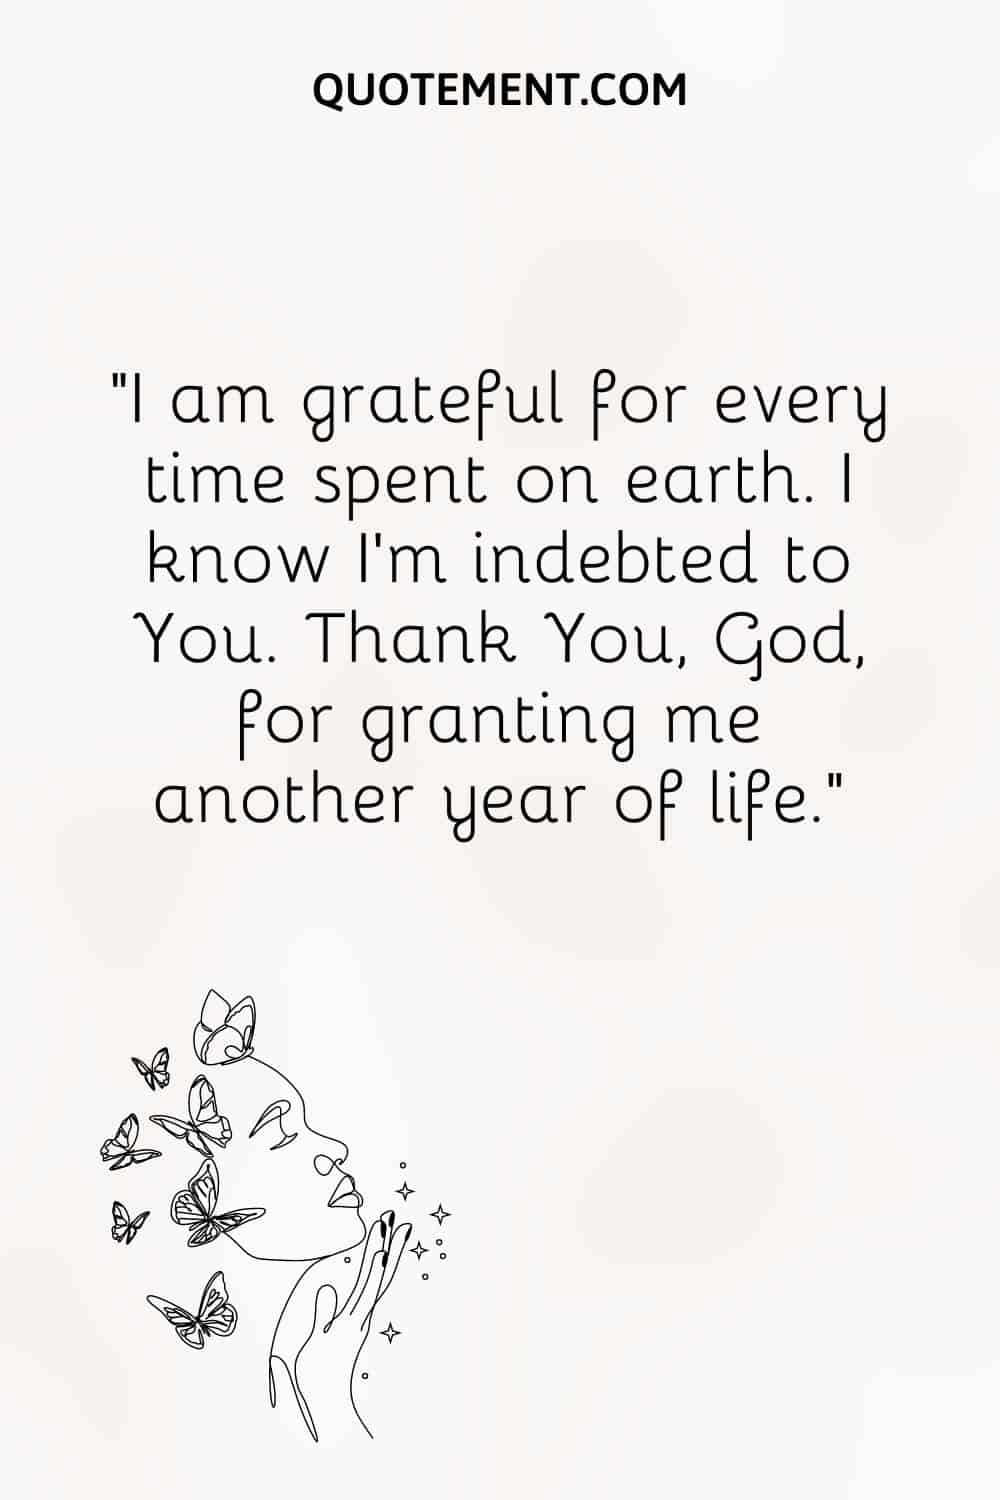 I am grateful for every time spent on earth.